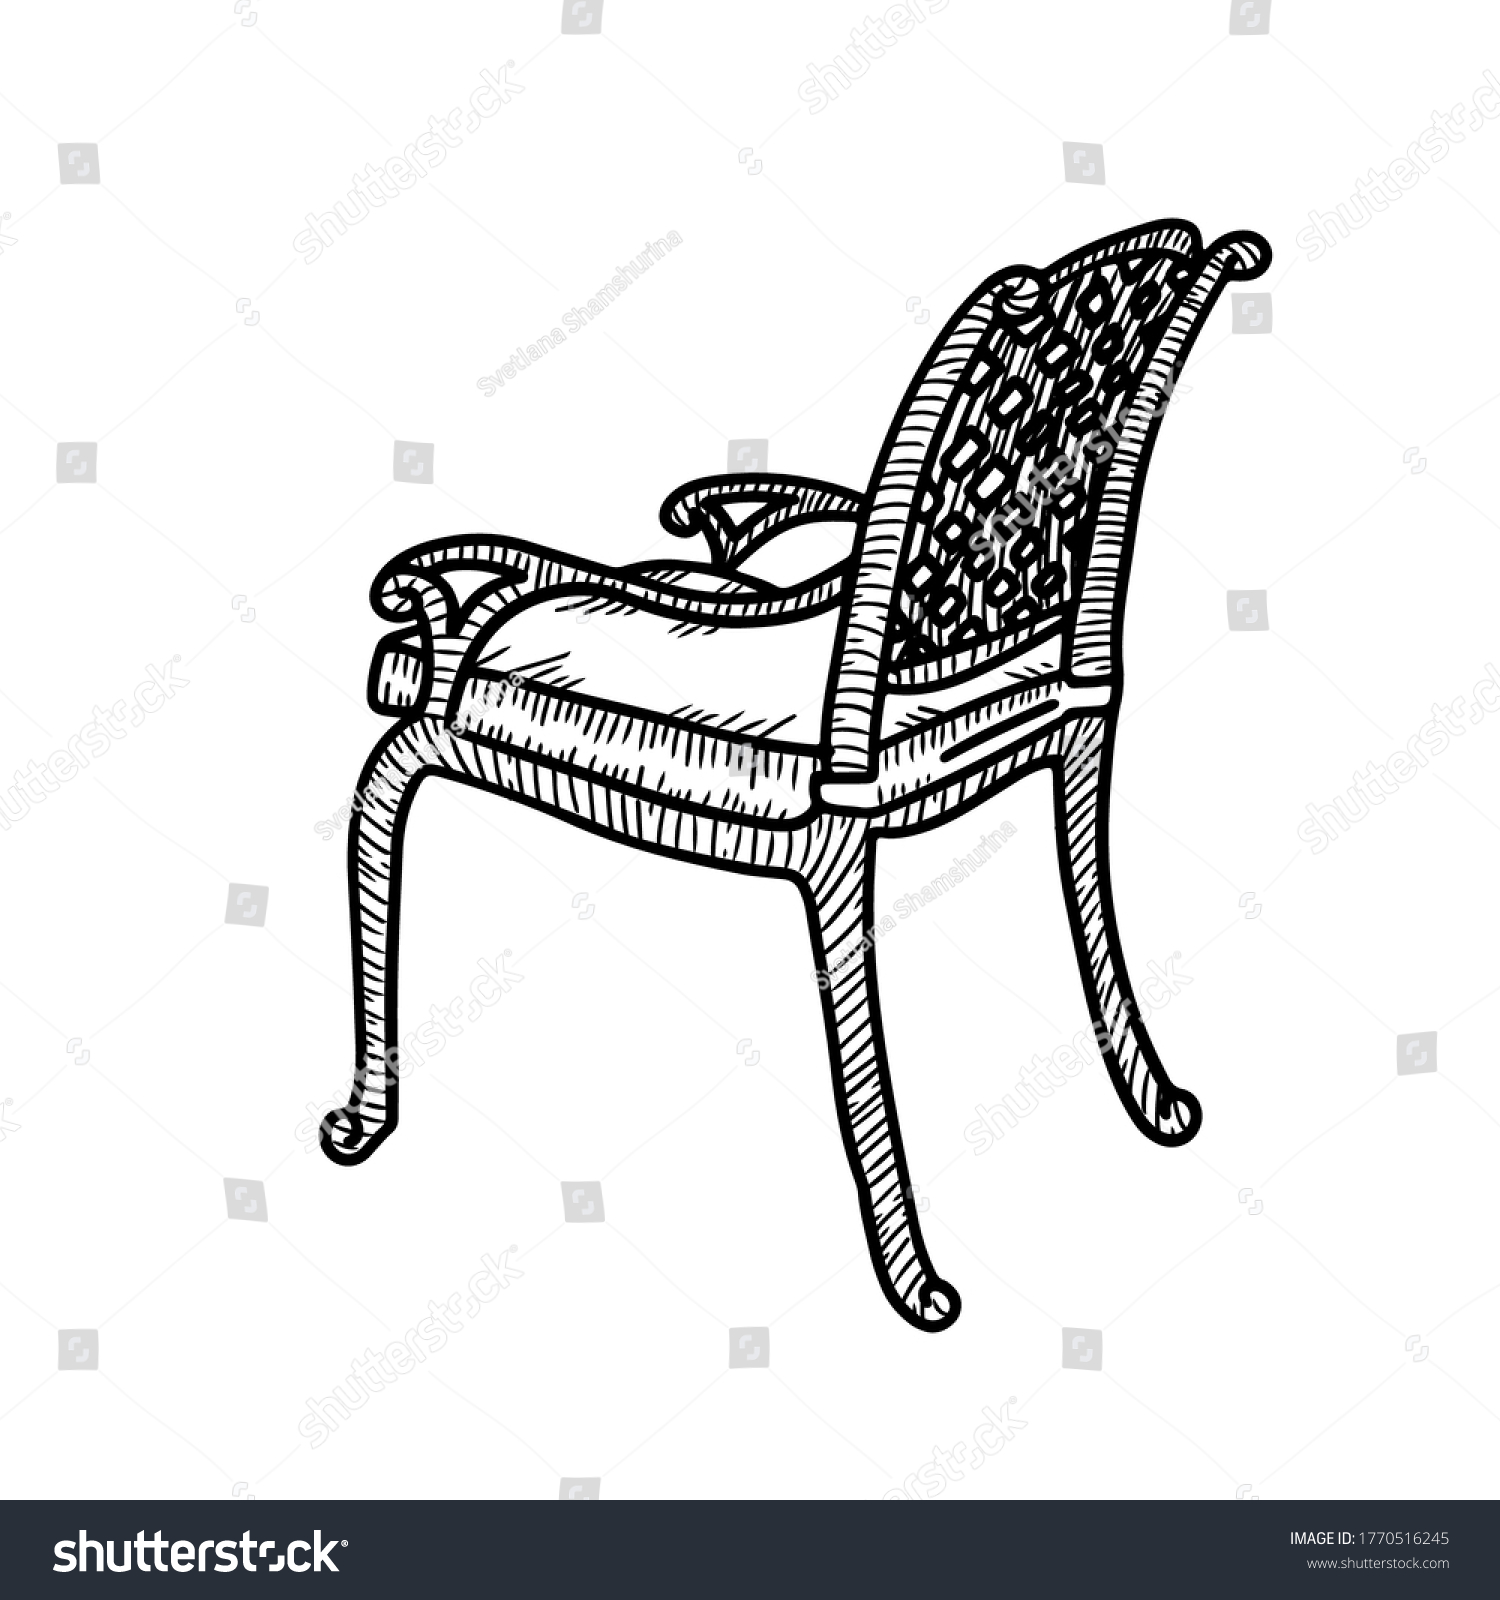 SVG of Line art wicker armchair. Wicker garden chair sketch. Outdoor street cafe furniture. Vector hand drawn illustration isolated on white background. Side view svg